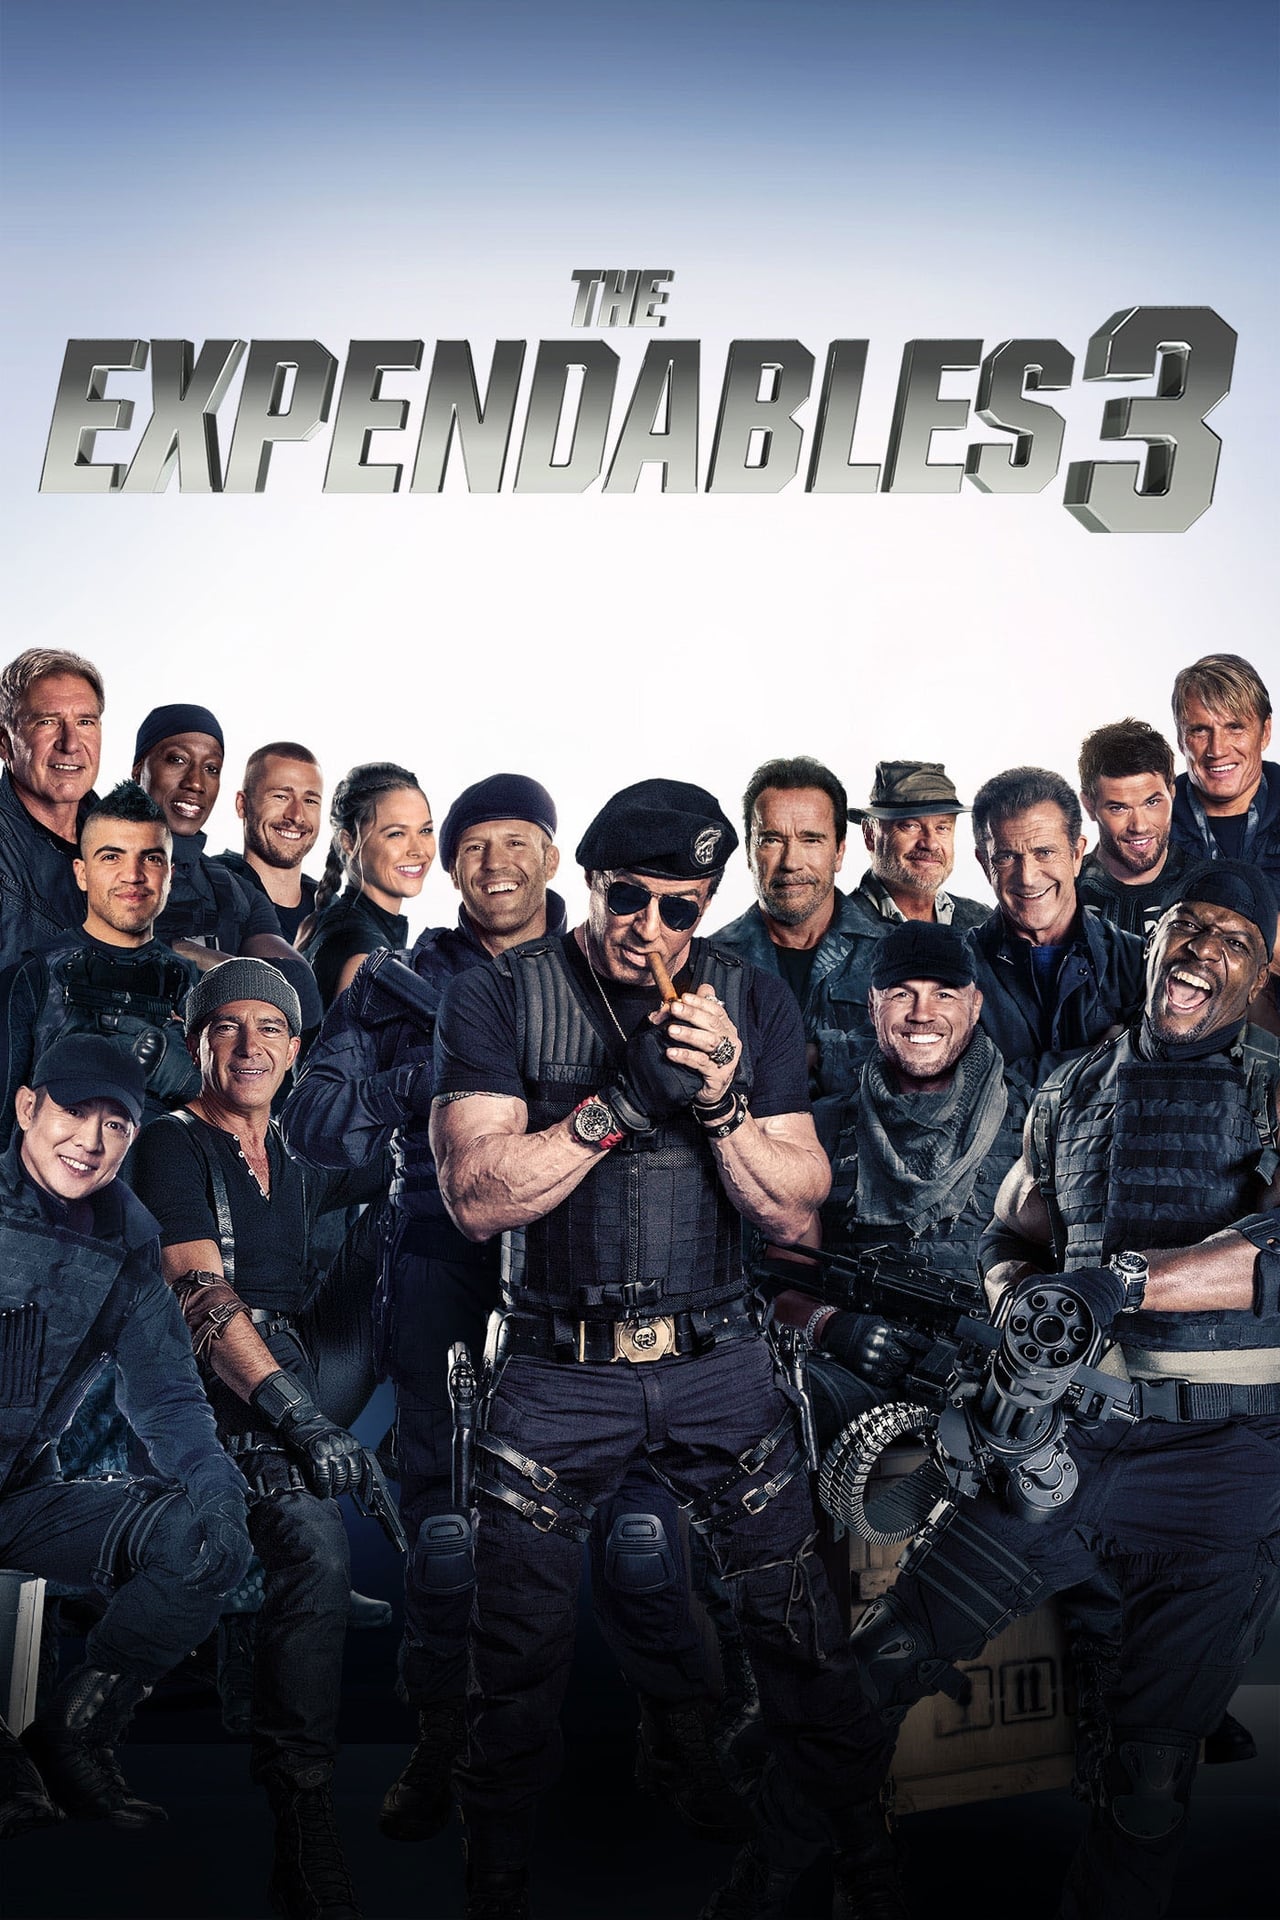 The Expendables 3 (2014) Theatrical Cut 640Kbps 23.976Fps 48Khz 5.1Ch BluRay Turkish Audio TAC